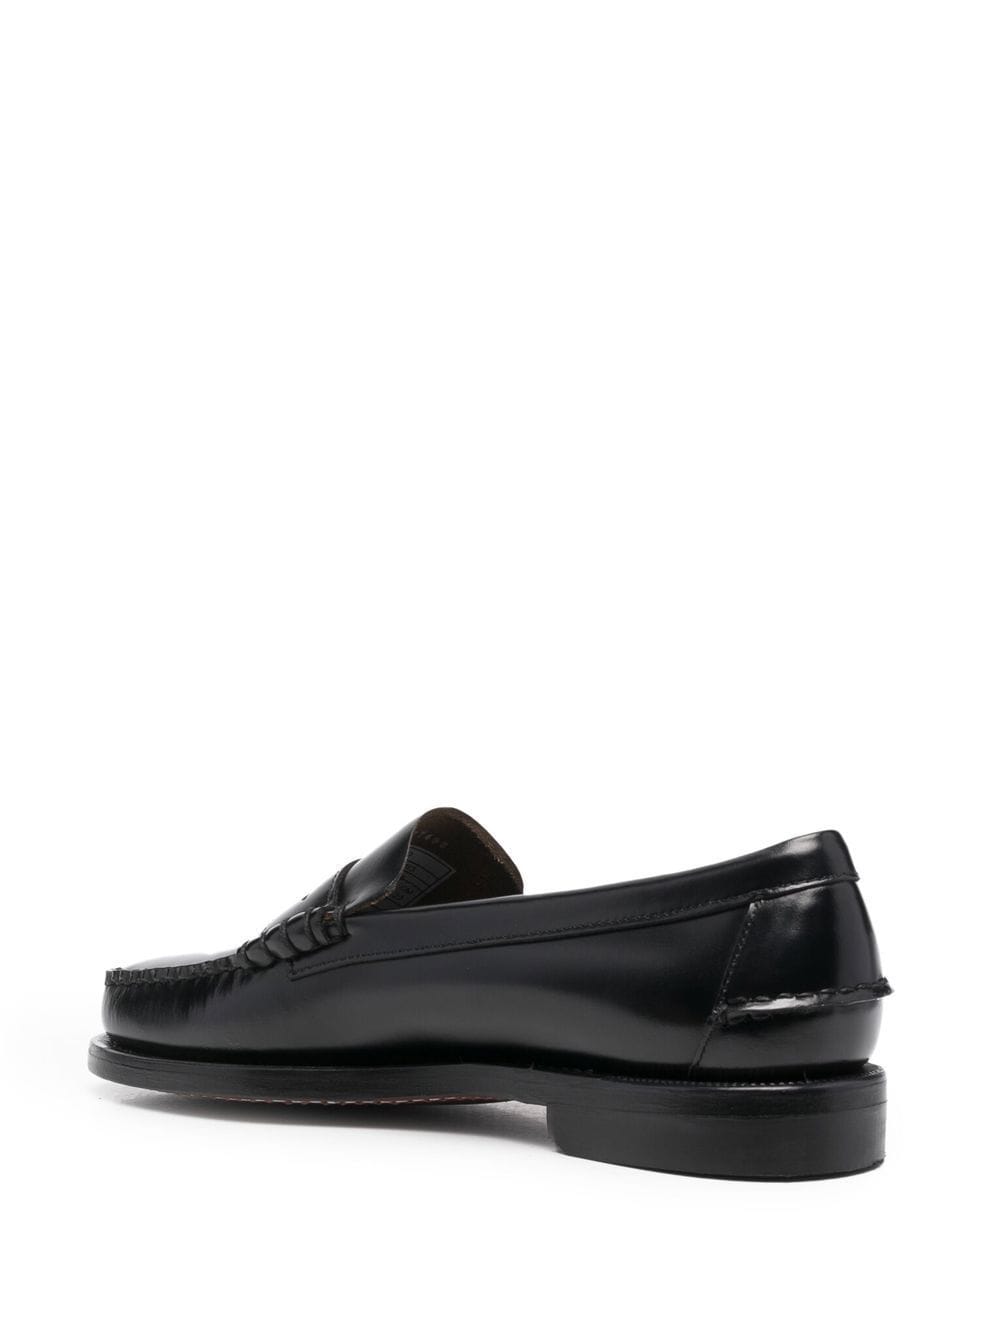 Black leather classic loafers